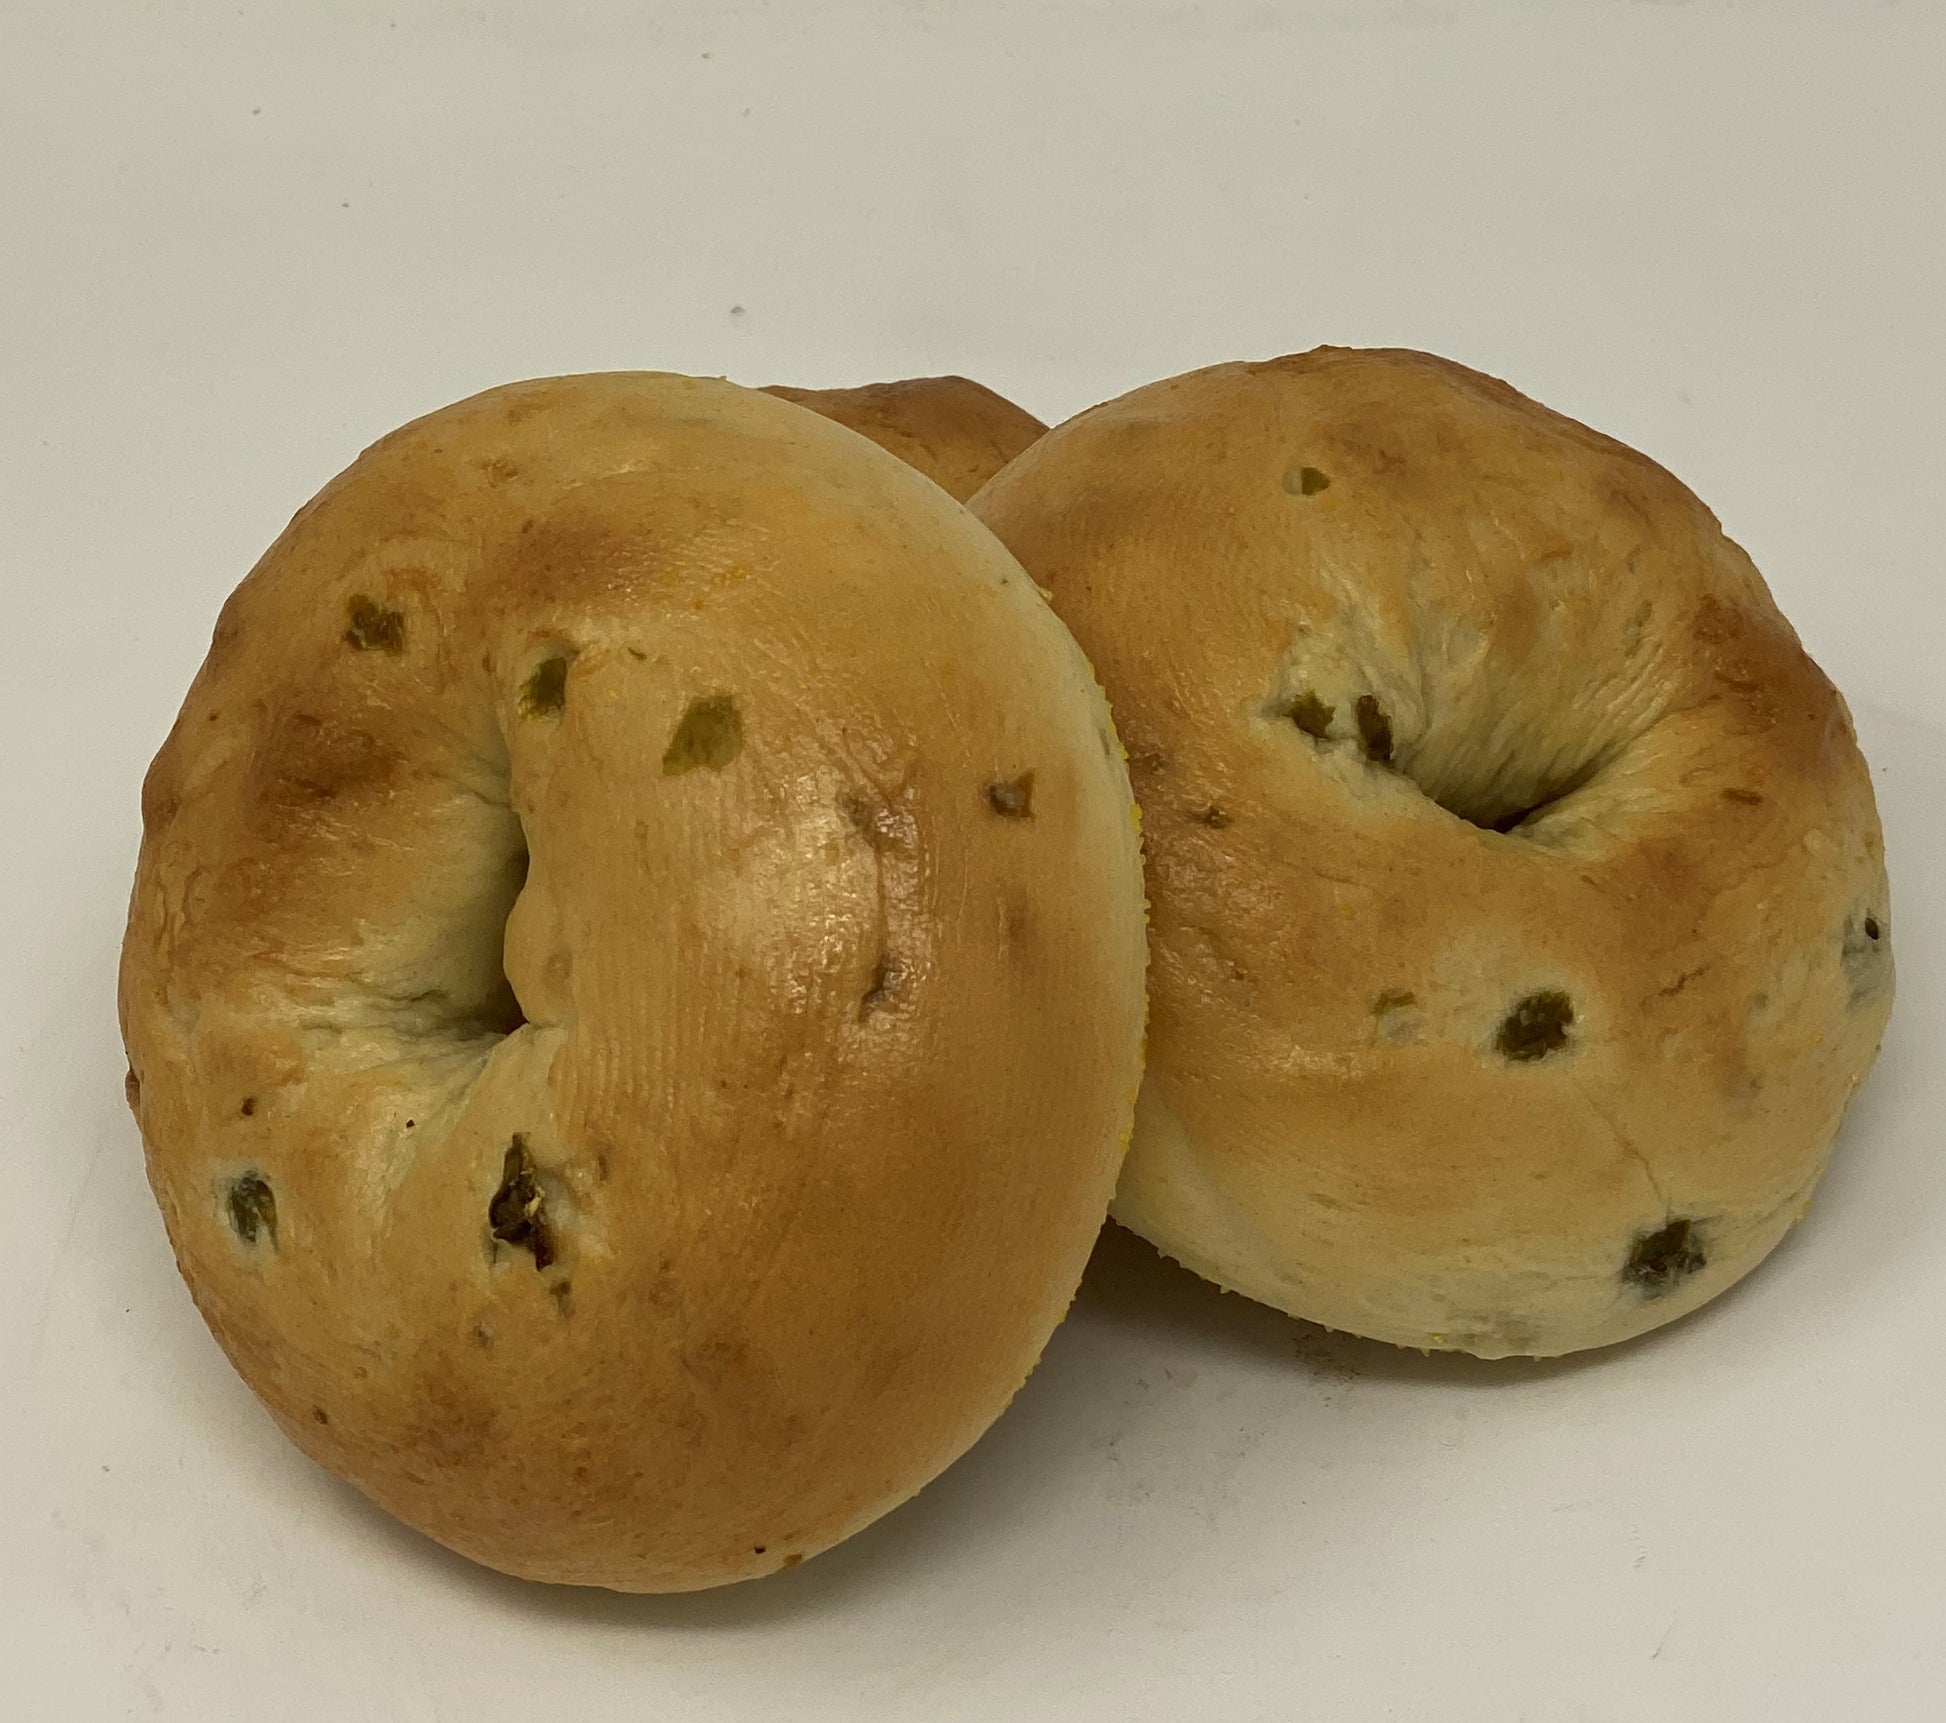 New York Style Jalapeño bagels. Our bagels are boiled and baked, not steamed. A little tough on the outside and soft on the inside.